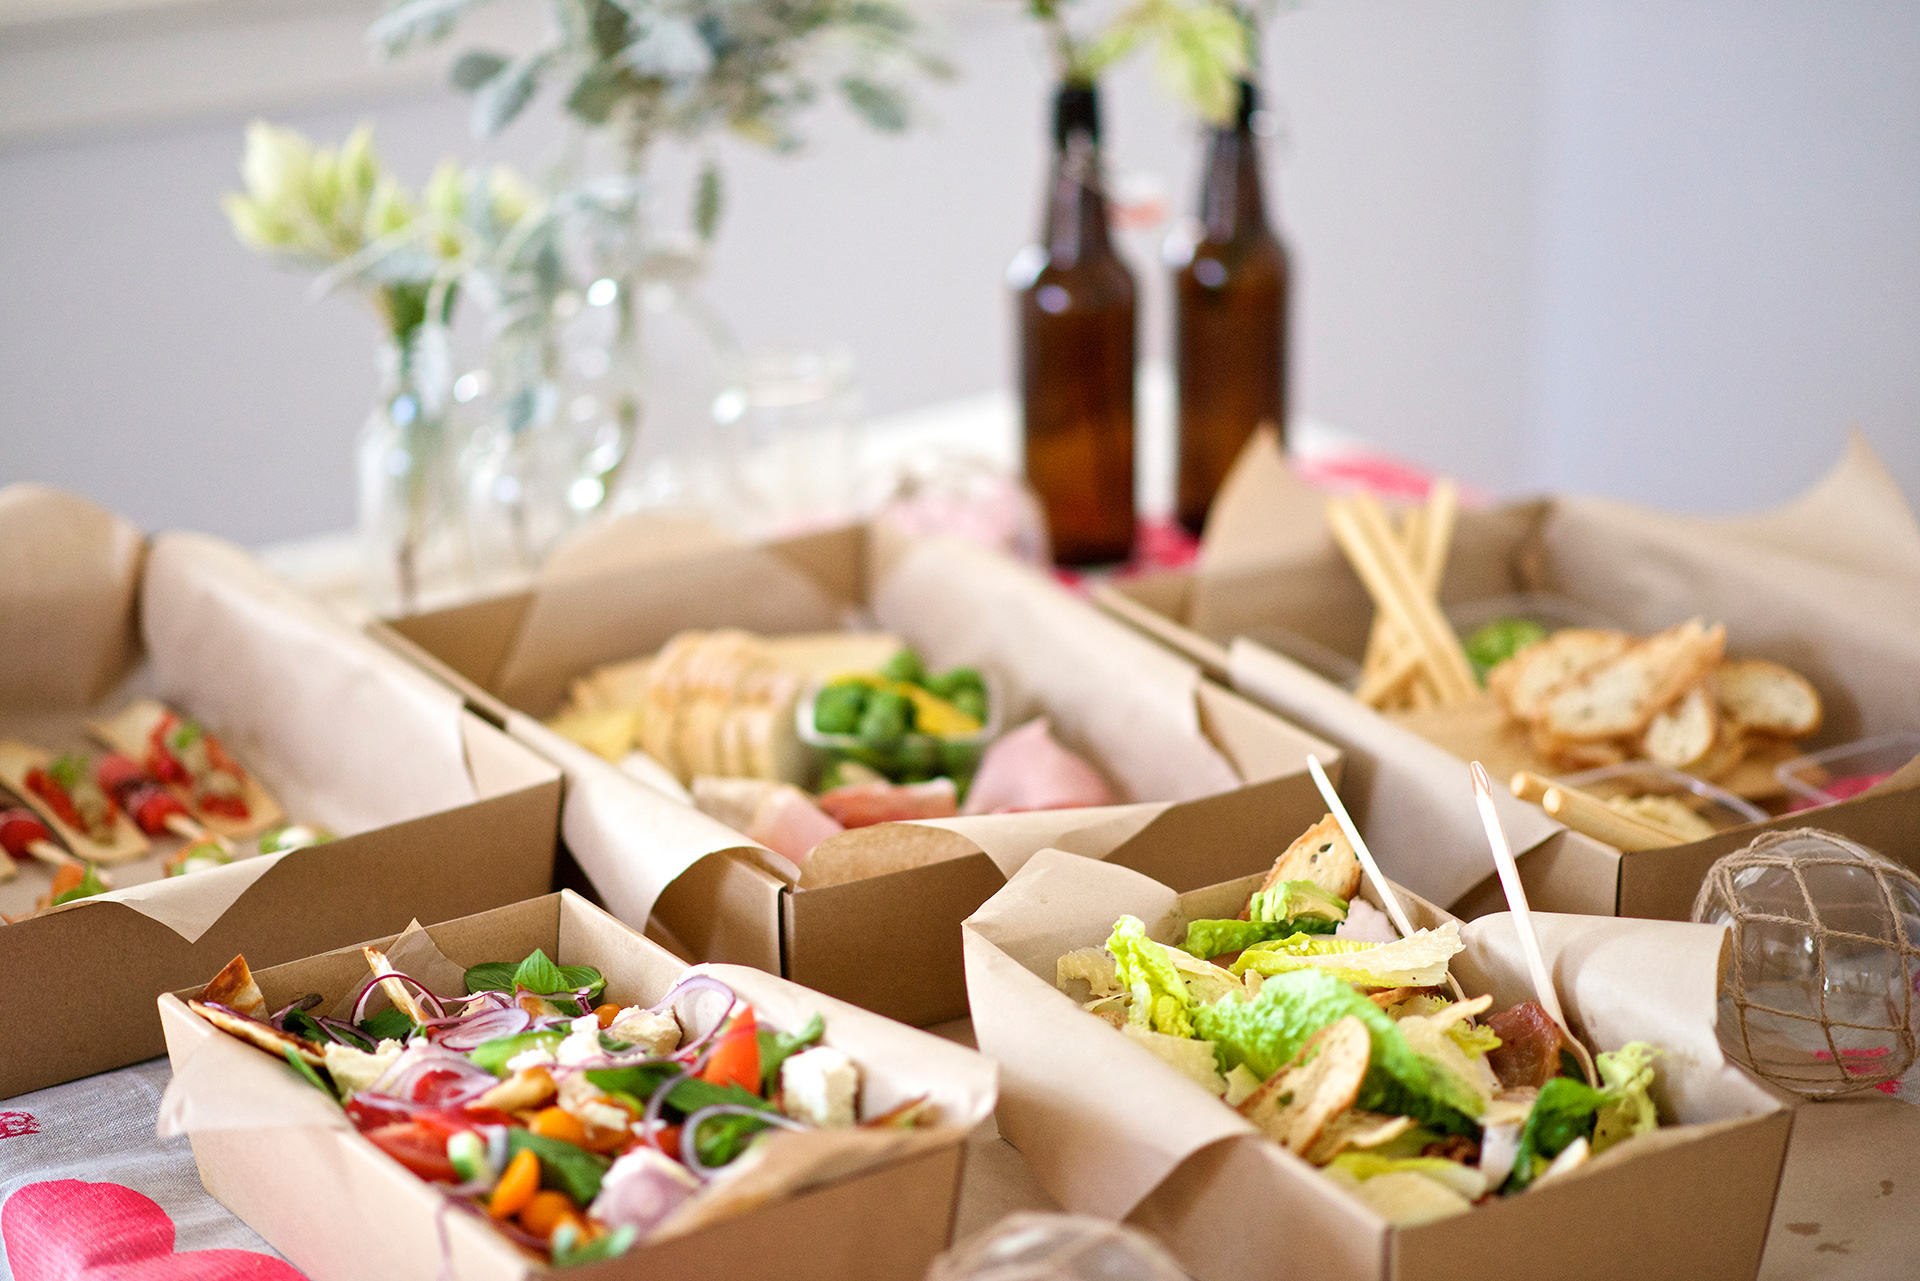 The Dropp gourmet food catering in Sydney